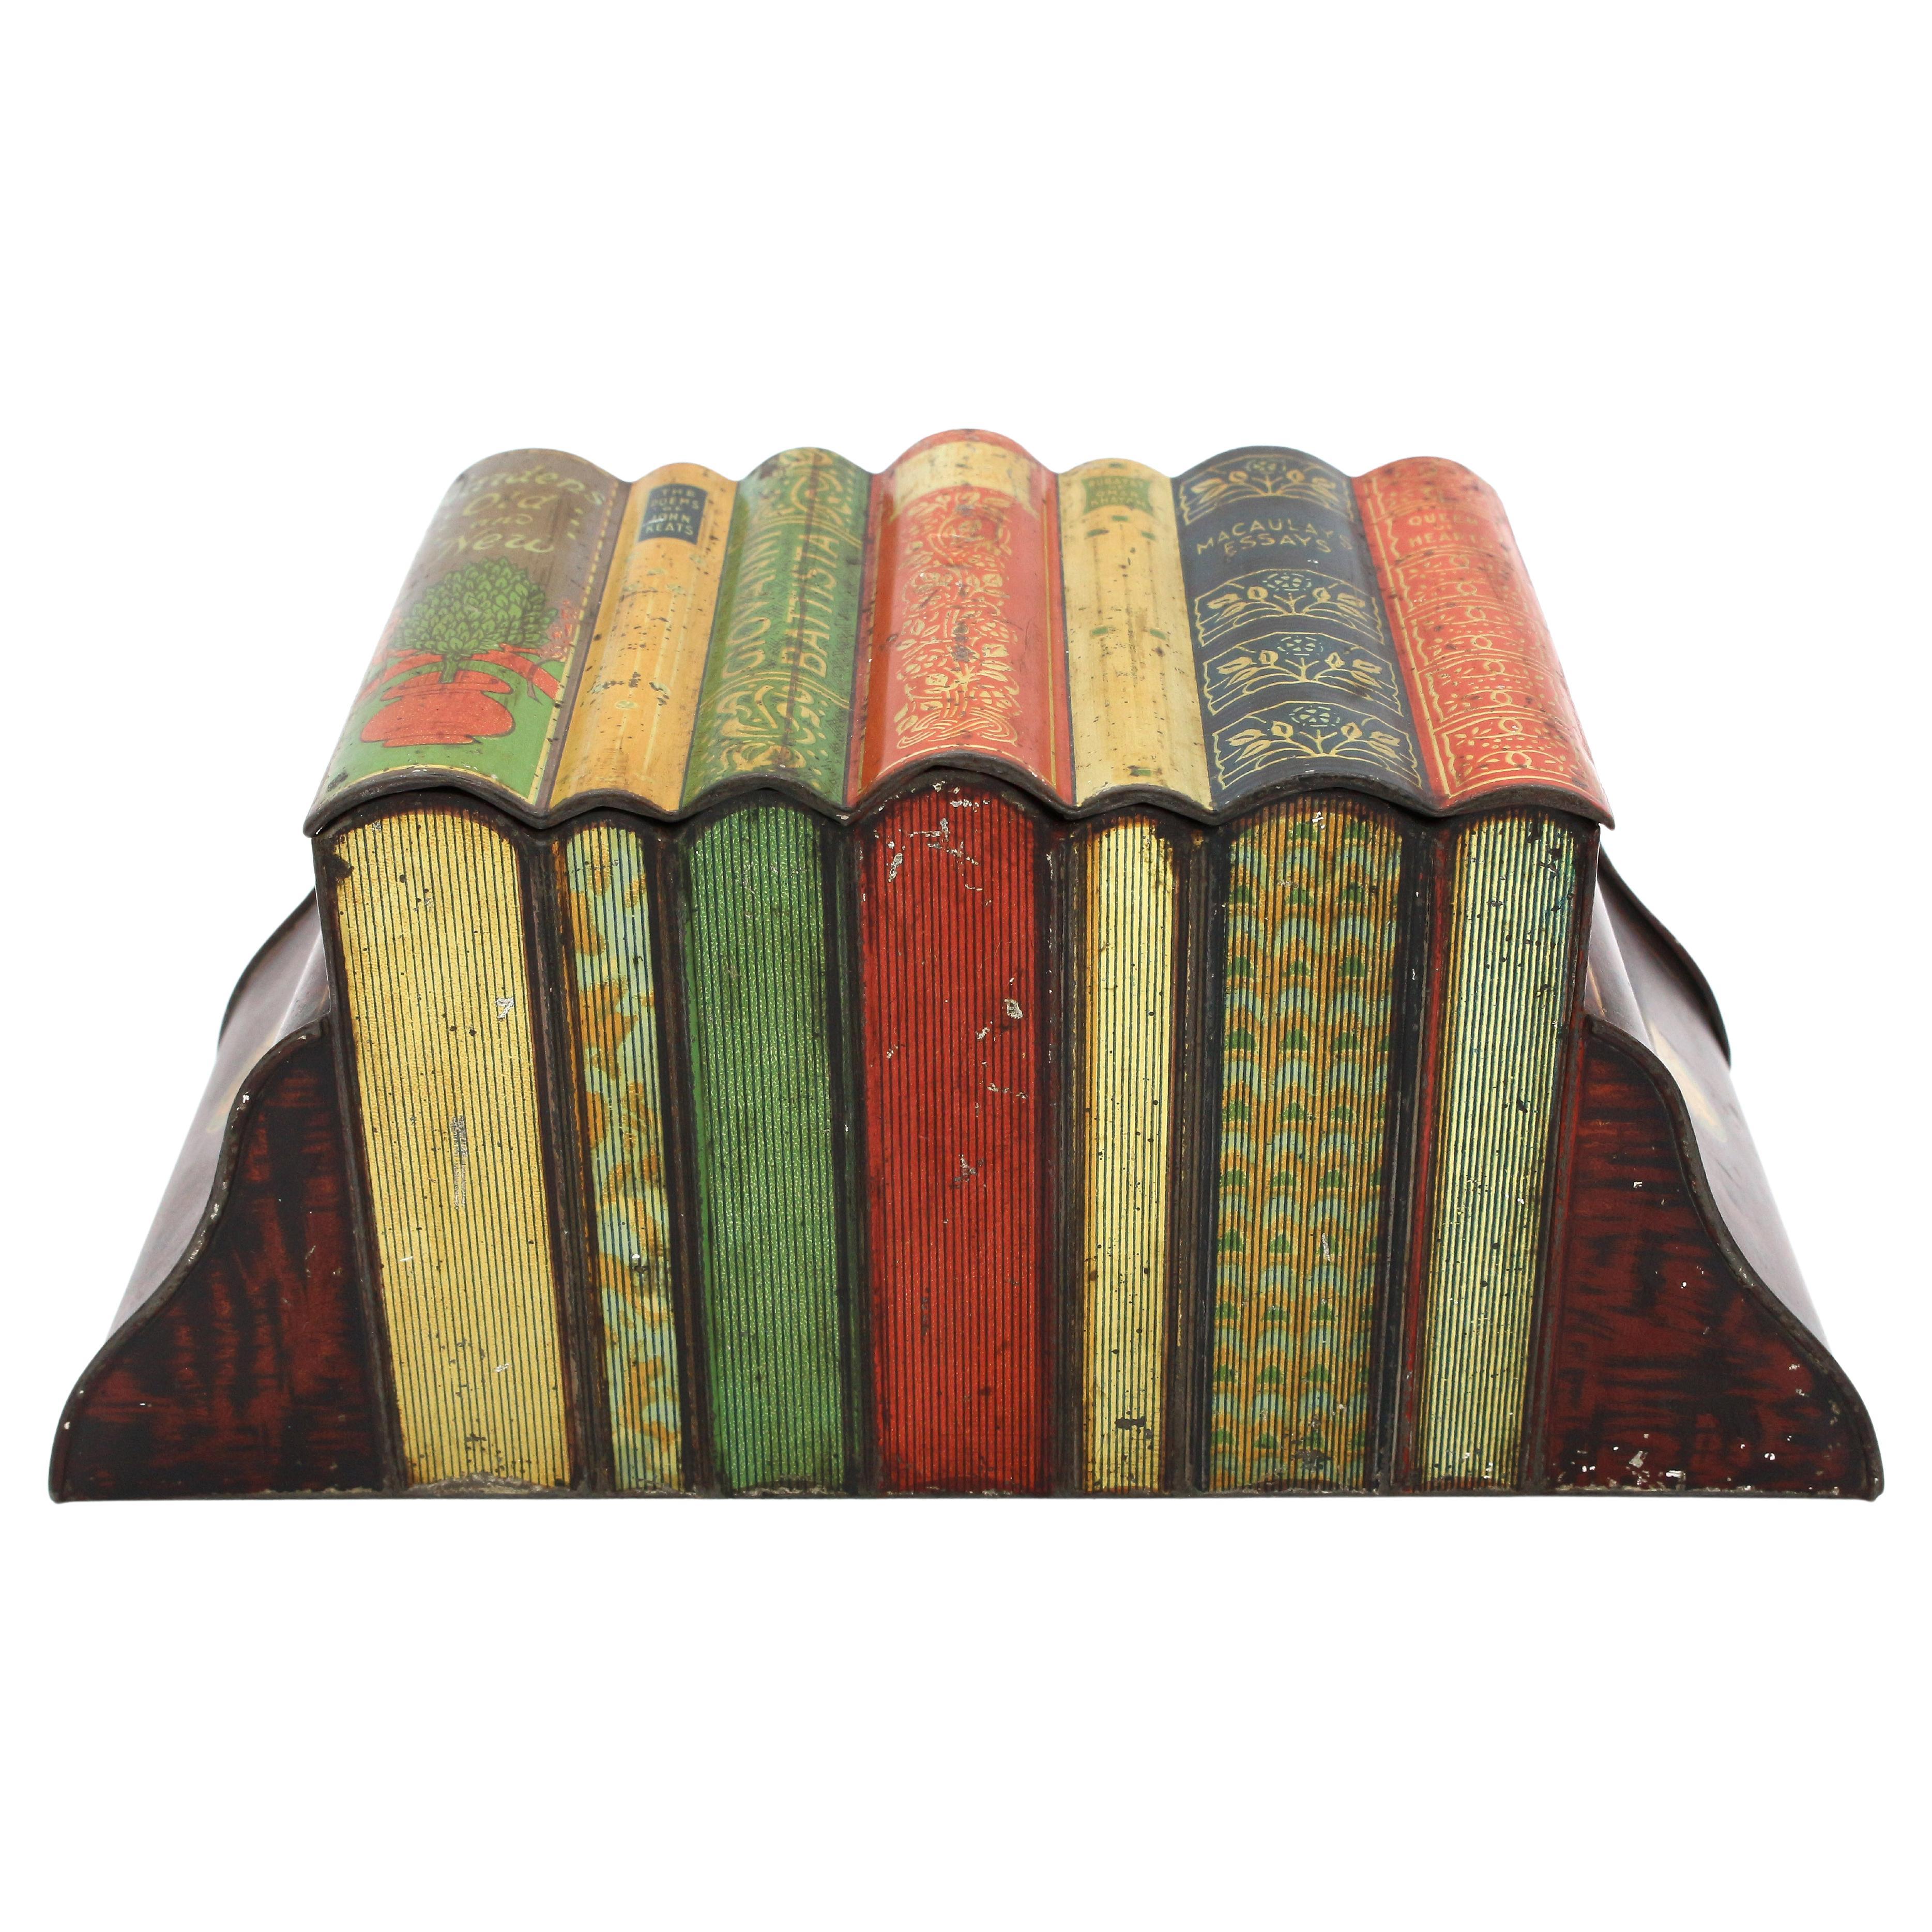 Early 20th Century Books & Bookend Form Biscuit Tin by Huntley & Palmers